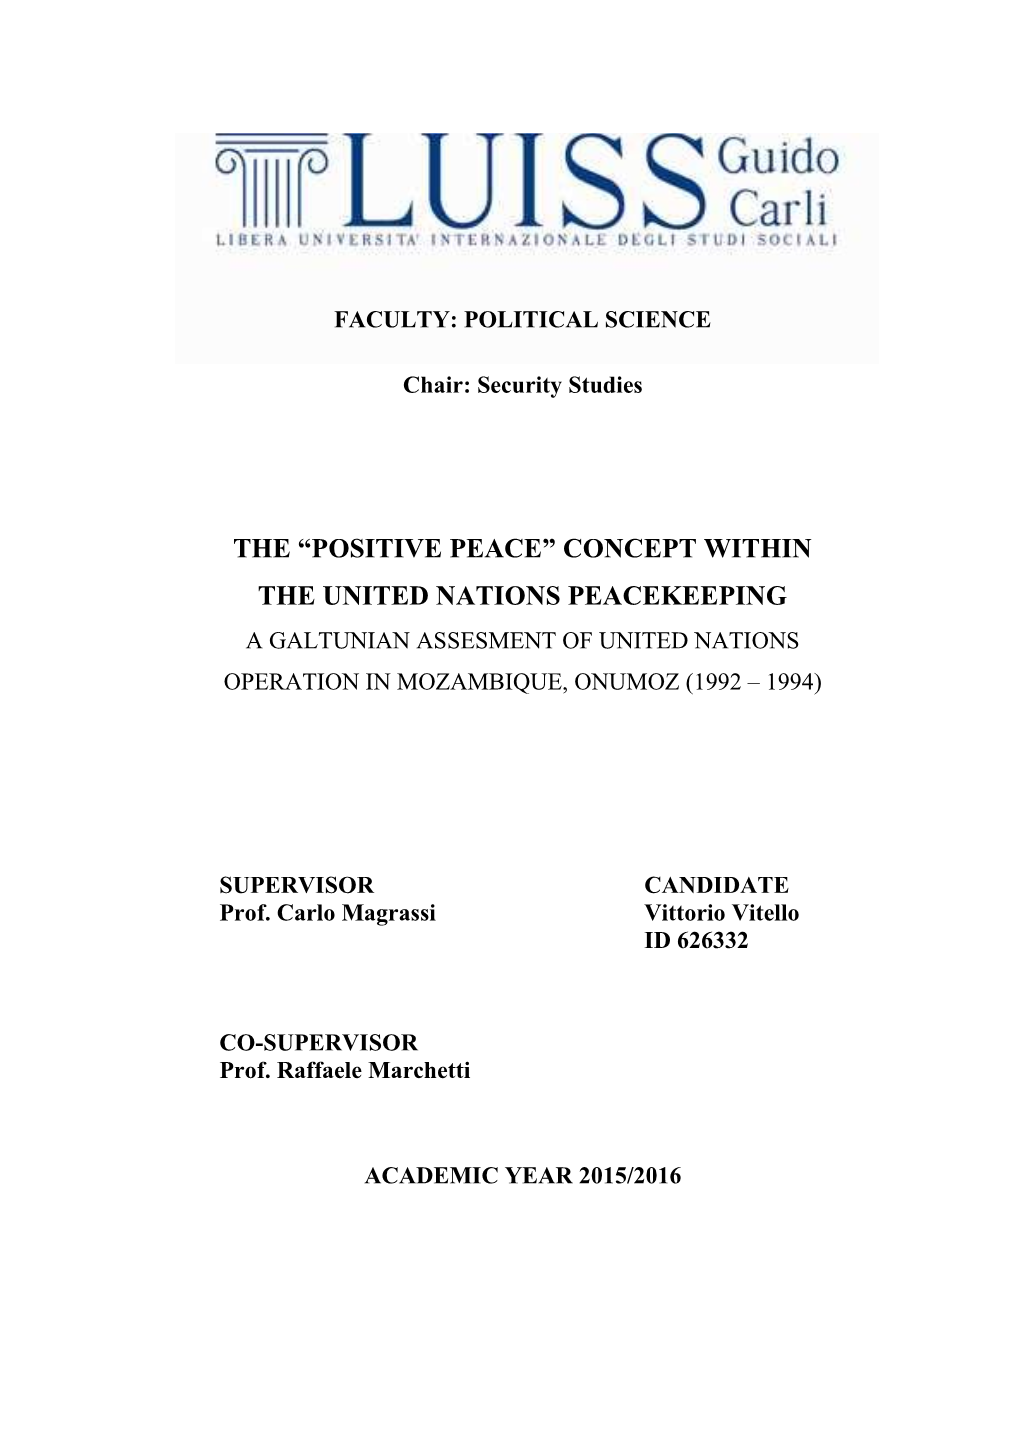 The “Positive Peace” Concept Within the United Nations Peacekeeping a Galtunian Assesment of United Nations Operation in Mozambique, Onumoz (1992 – 1994)